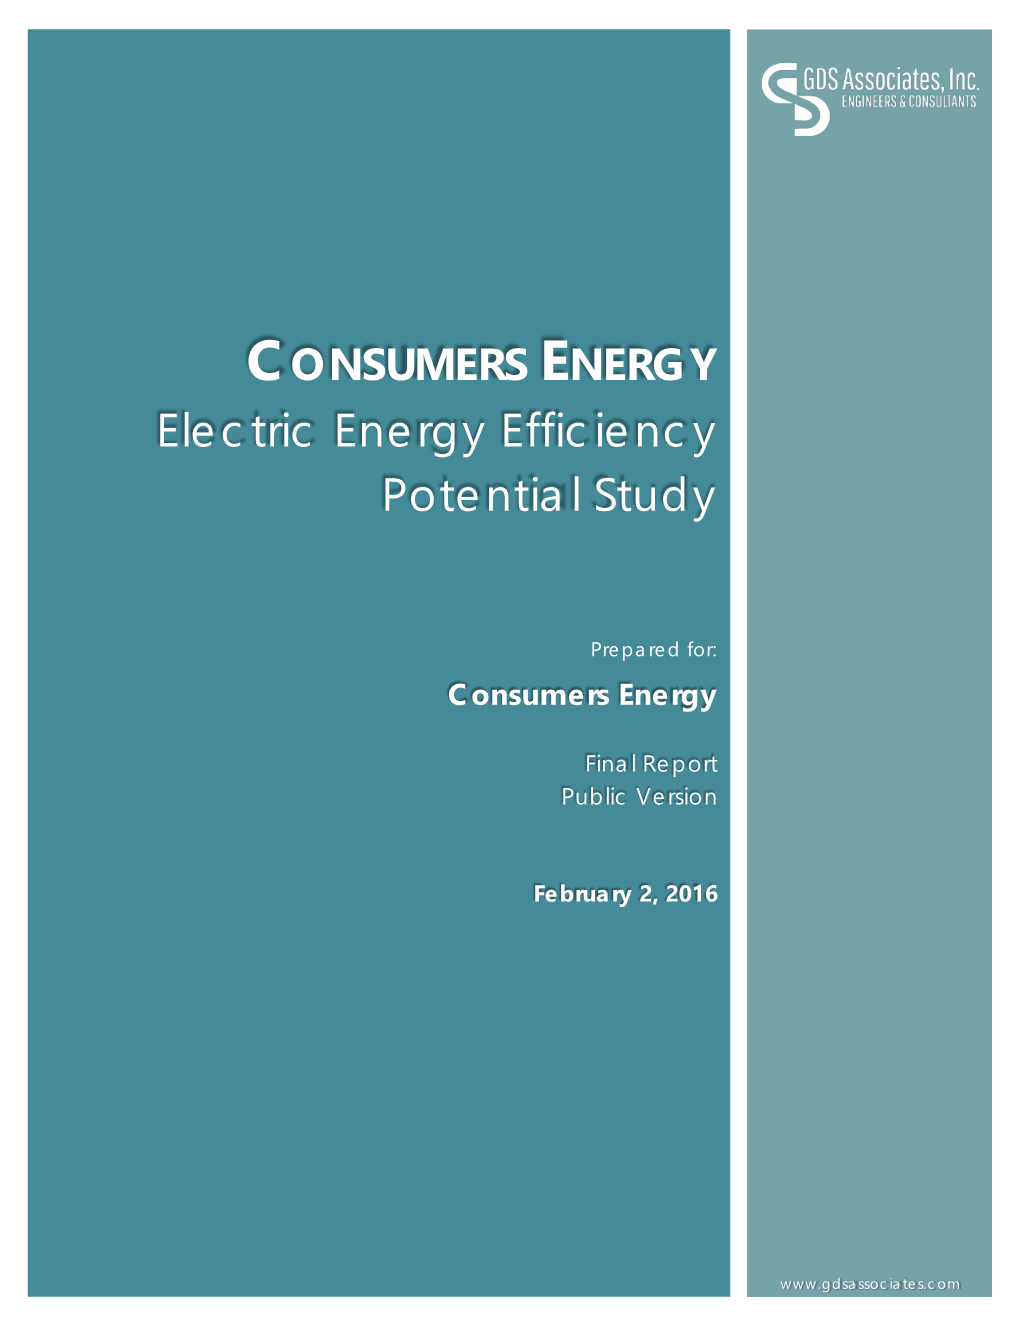 Consumers Energy Electric Energy Efficiency Potential Study